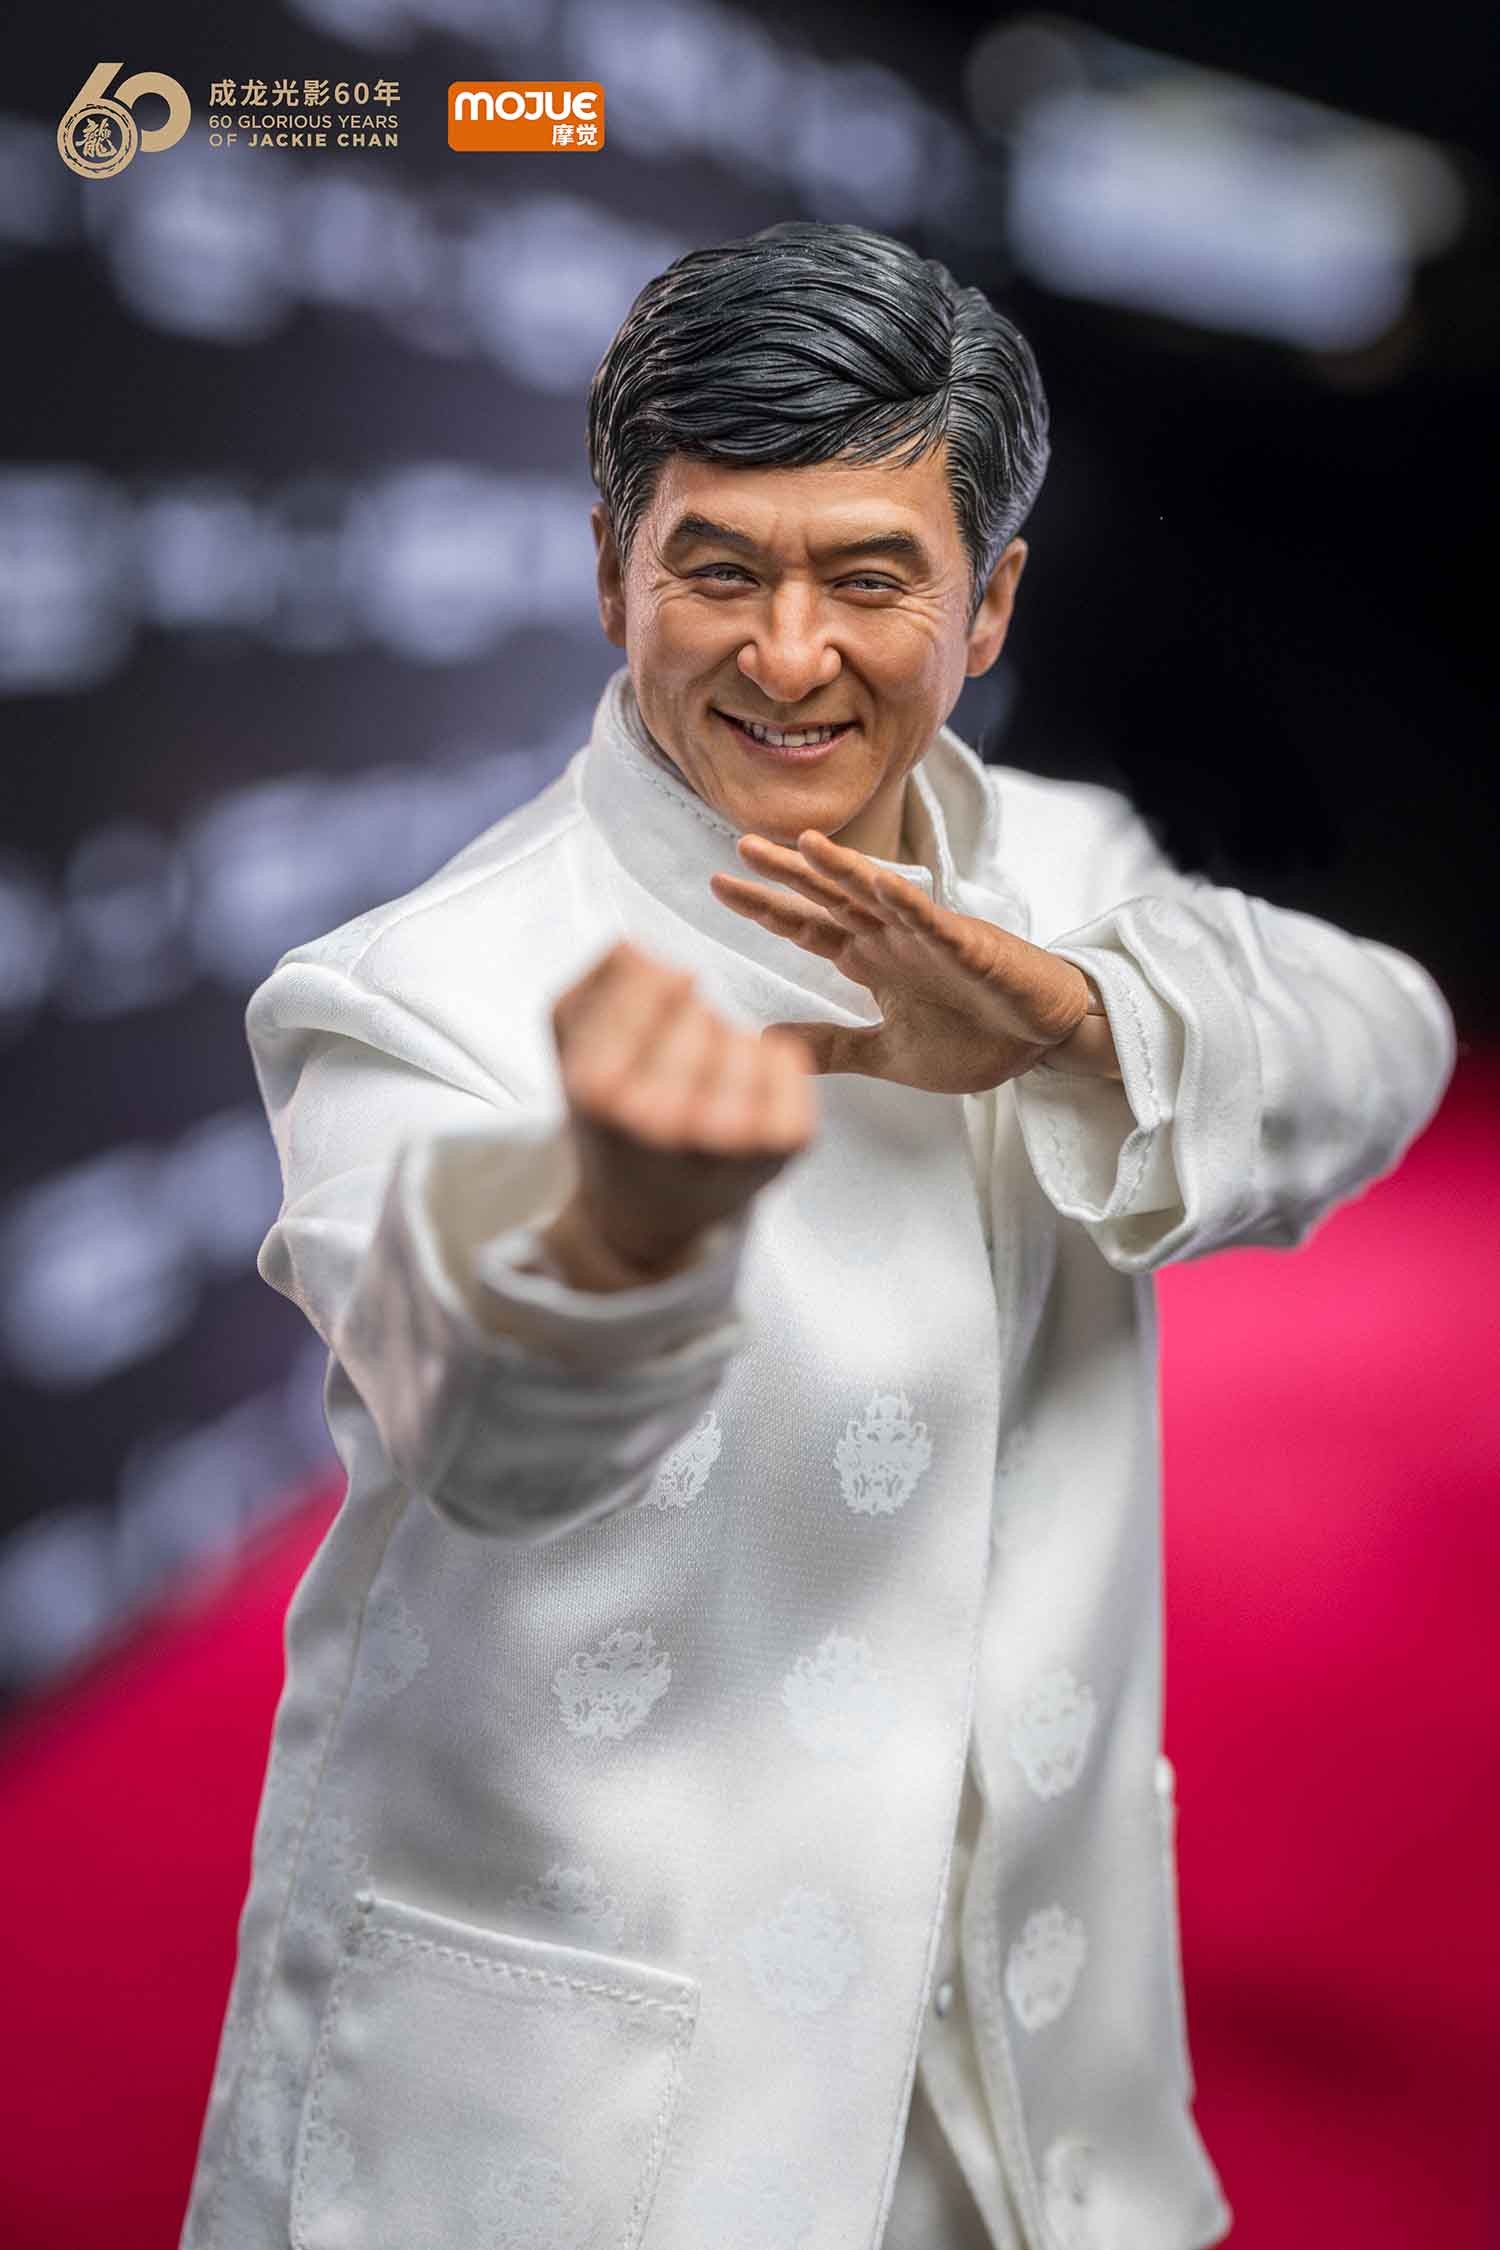 Jackie Chan - Legendary Edition- Prototype Shown